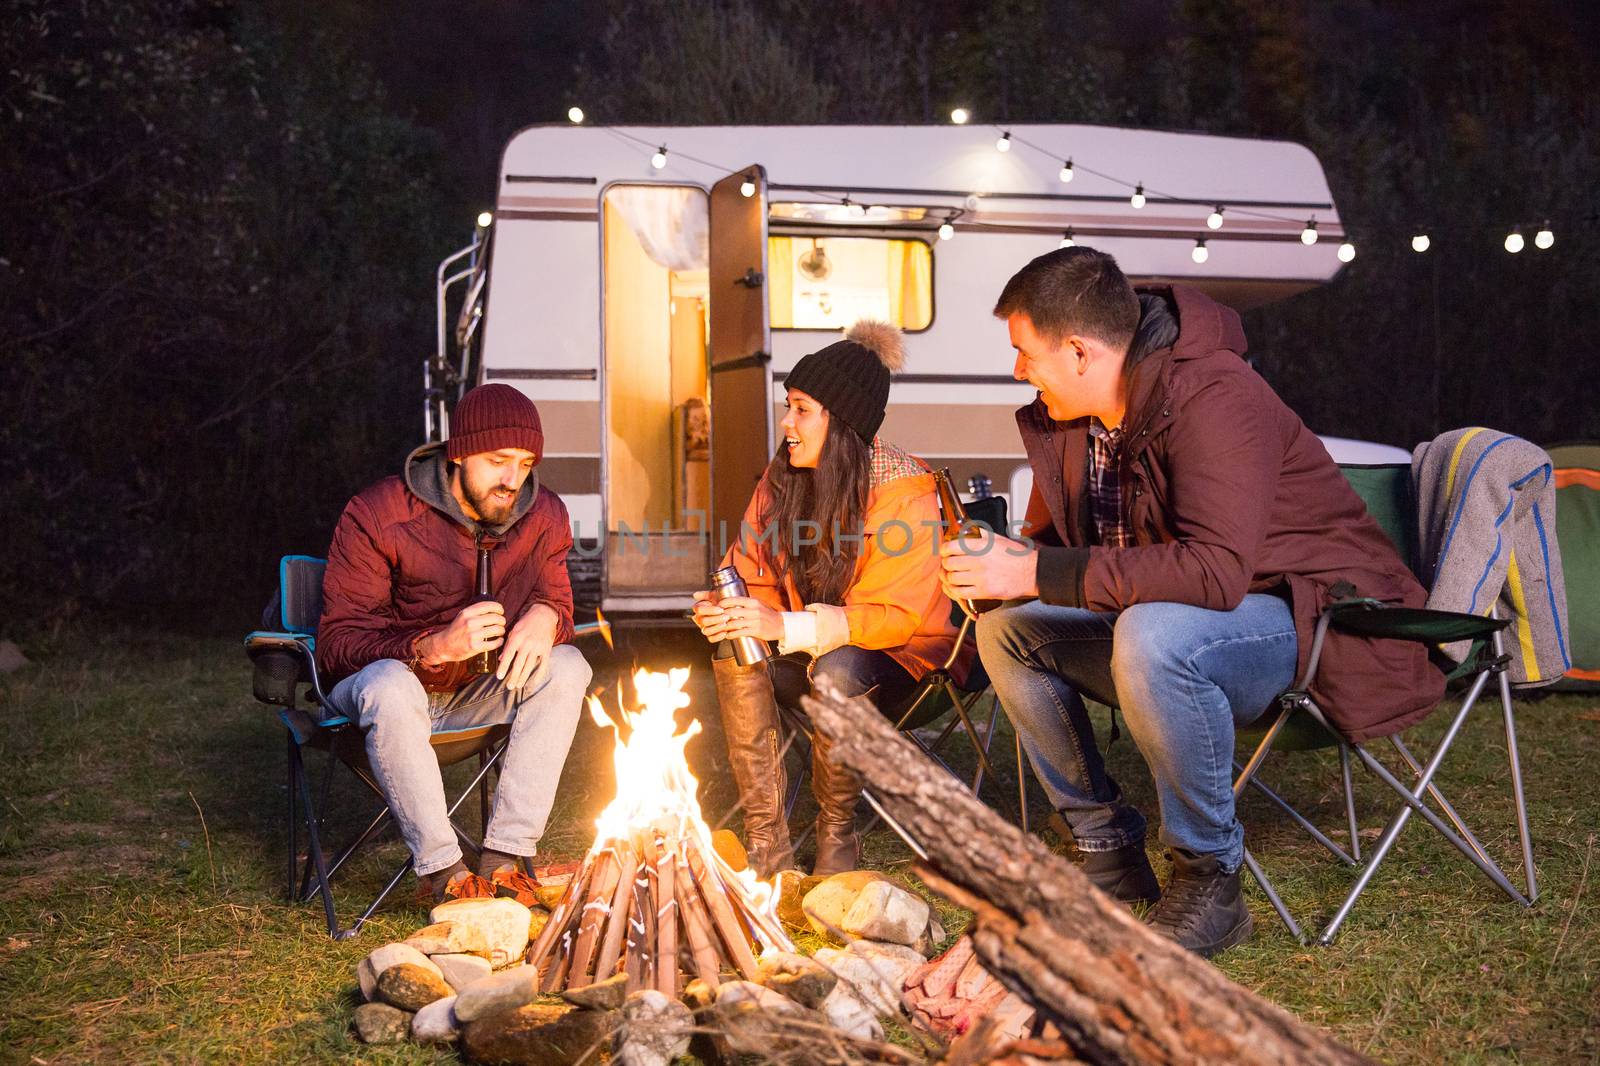 Group of close friends camping together in the mountains relaxing around camping fire. Retro camper van. Nature clean air.